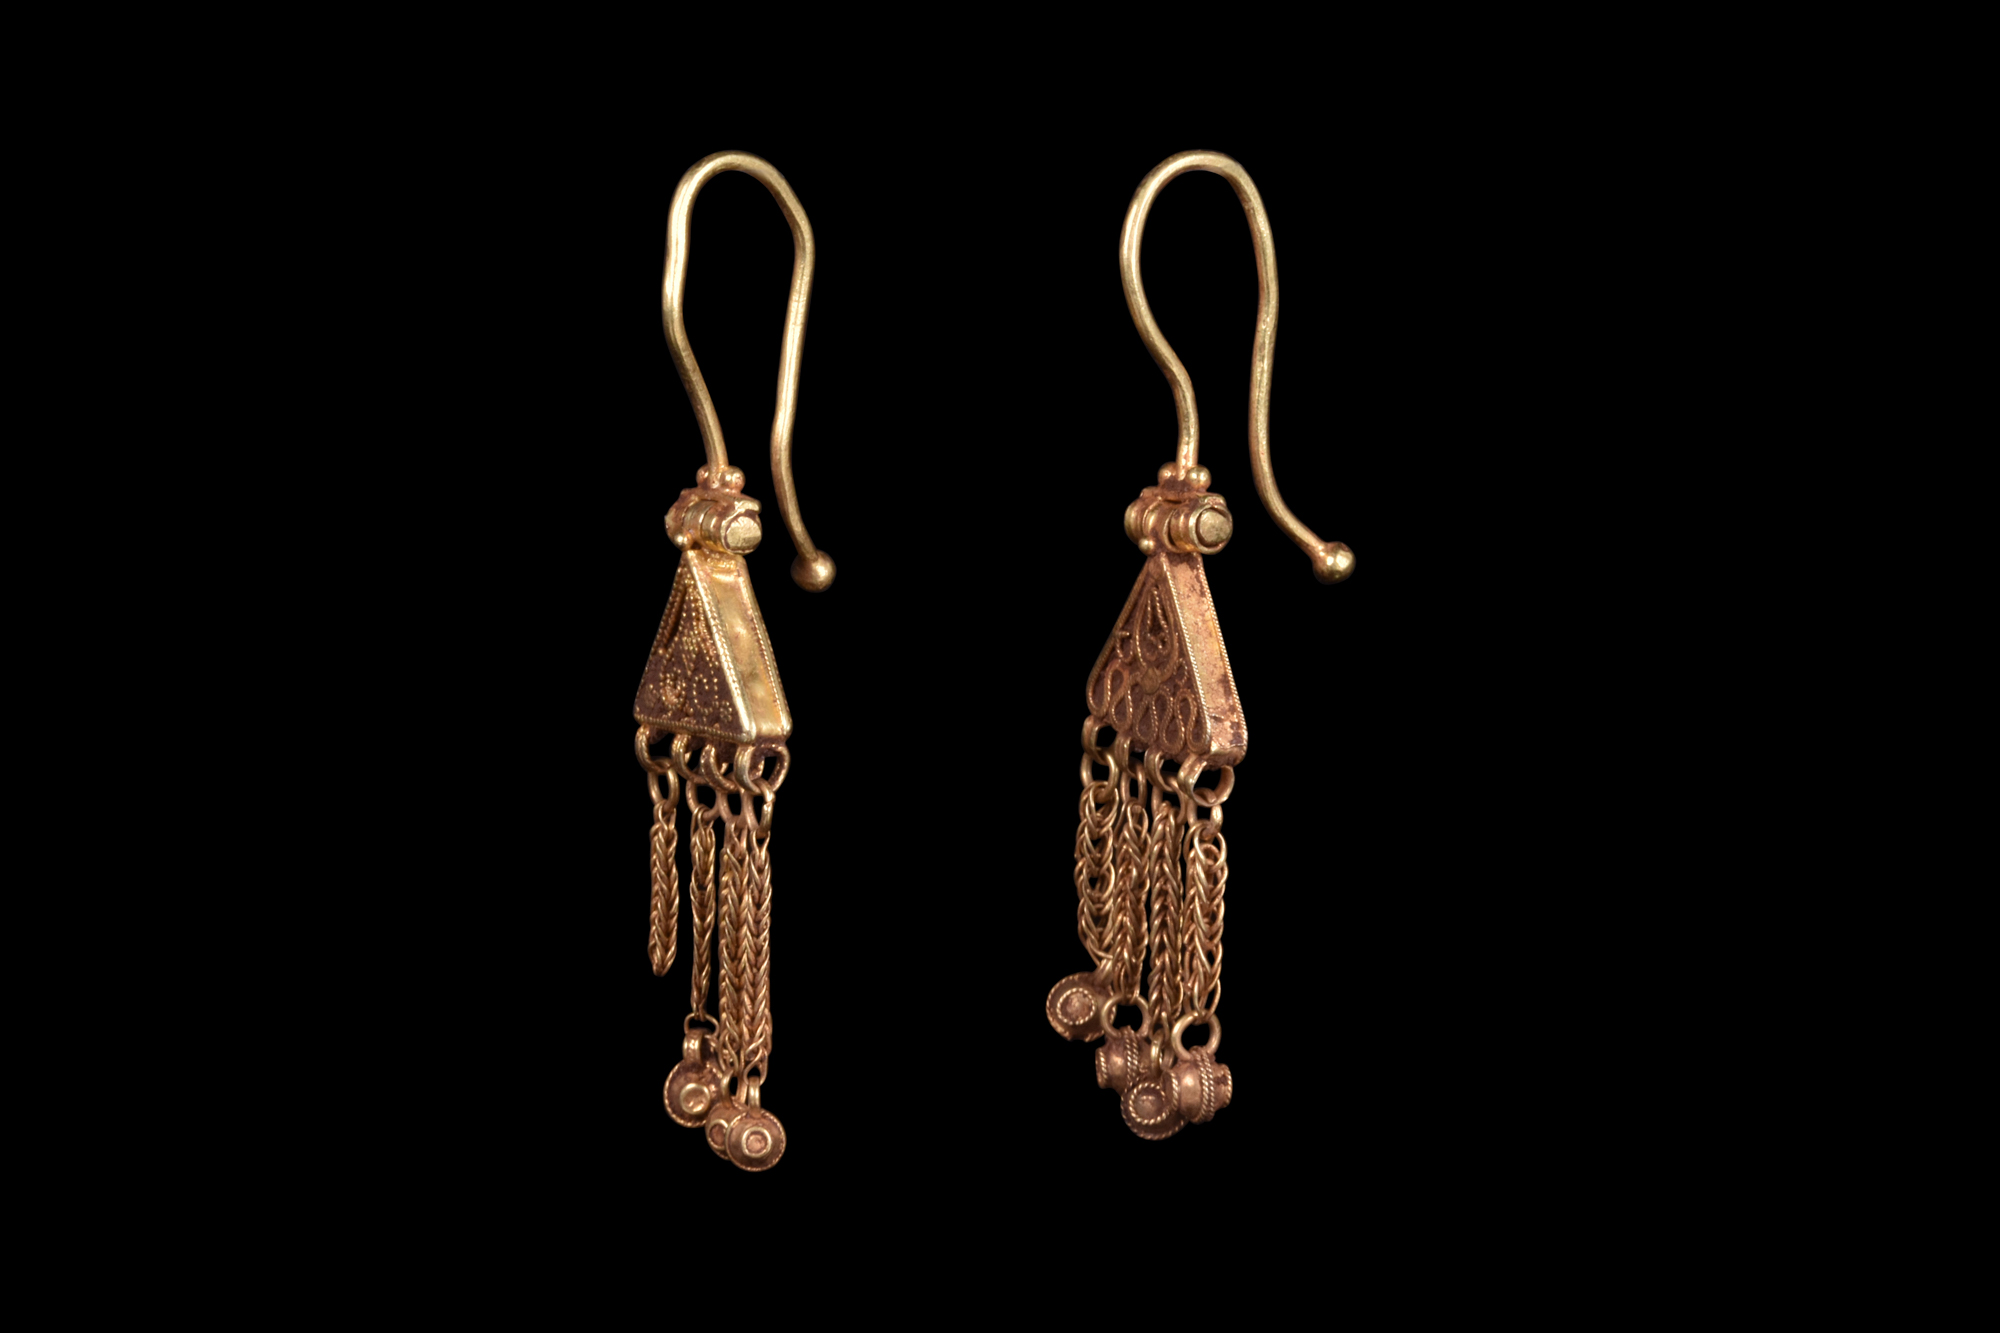 BYZANTINE GOLD PAIR OF EARRINGS WITH DANGLES - Image 2 of 3